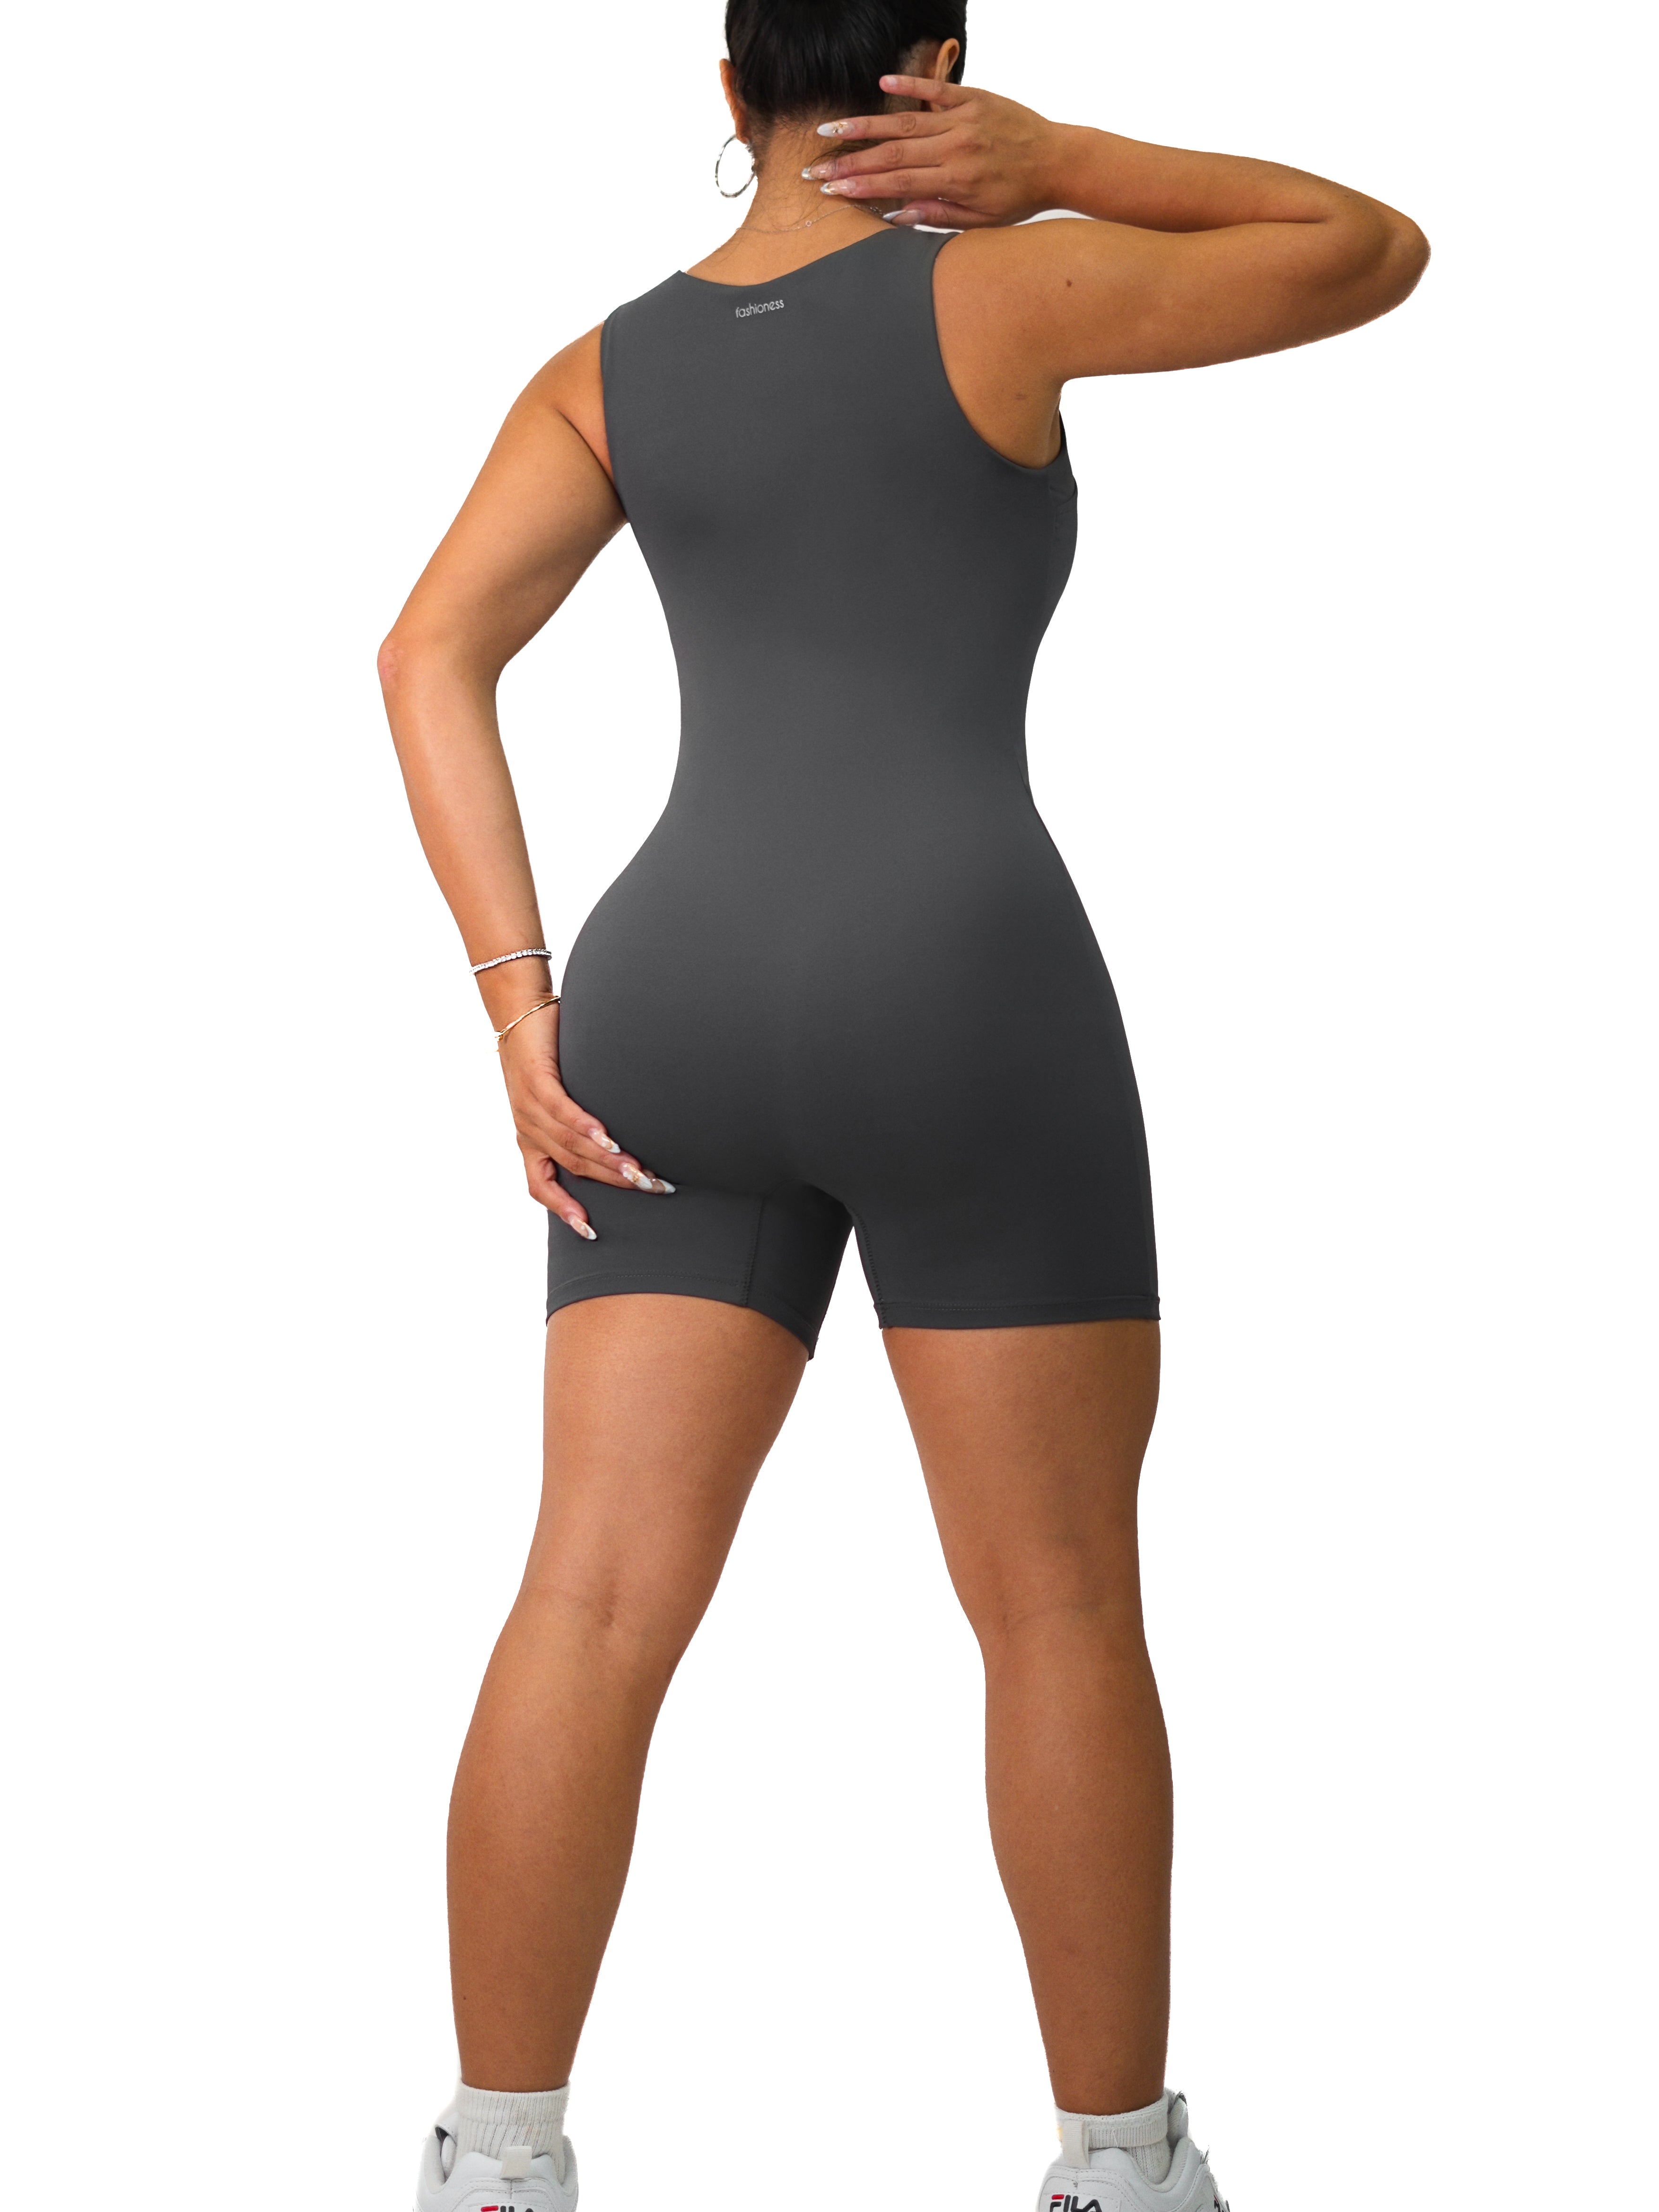 Athletica Coverage Short Romper (Charcoal)